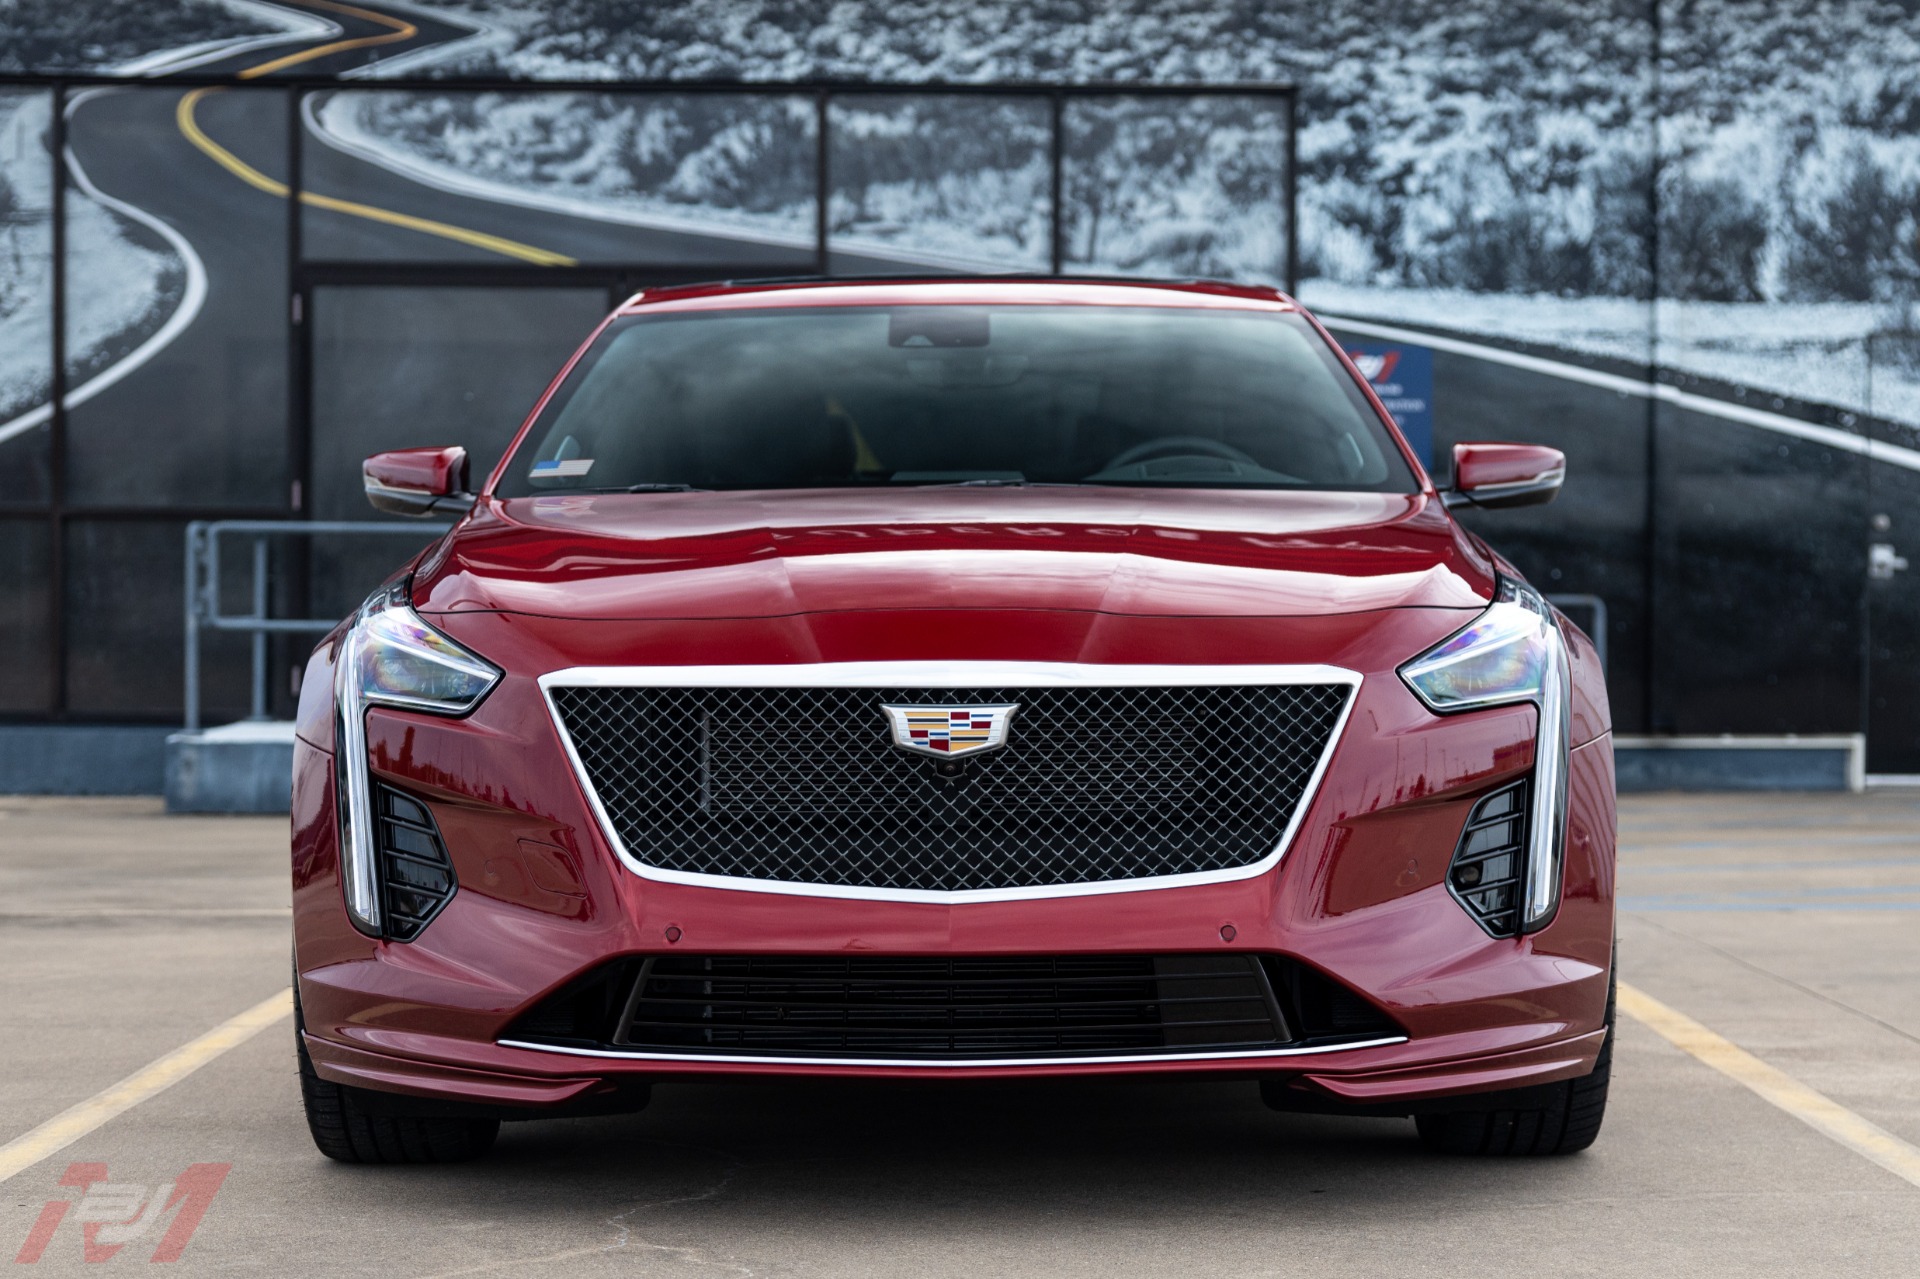 Used-2020-Cadillac-CT6-V-Blackwing-1-of-600